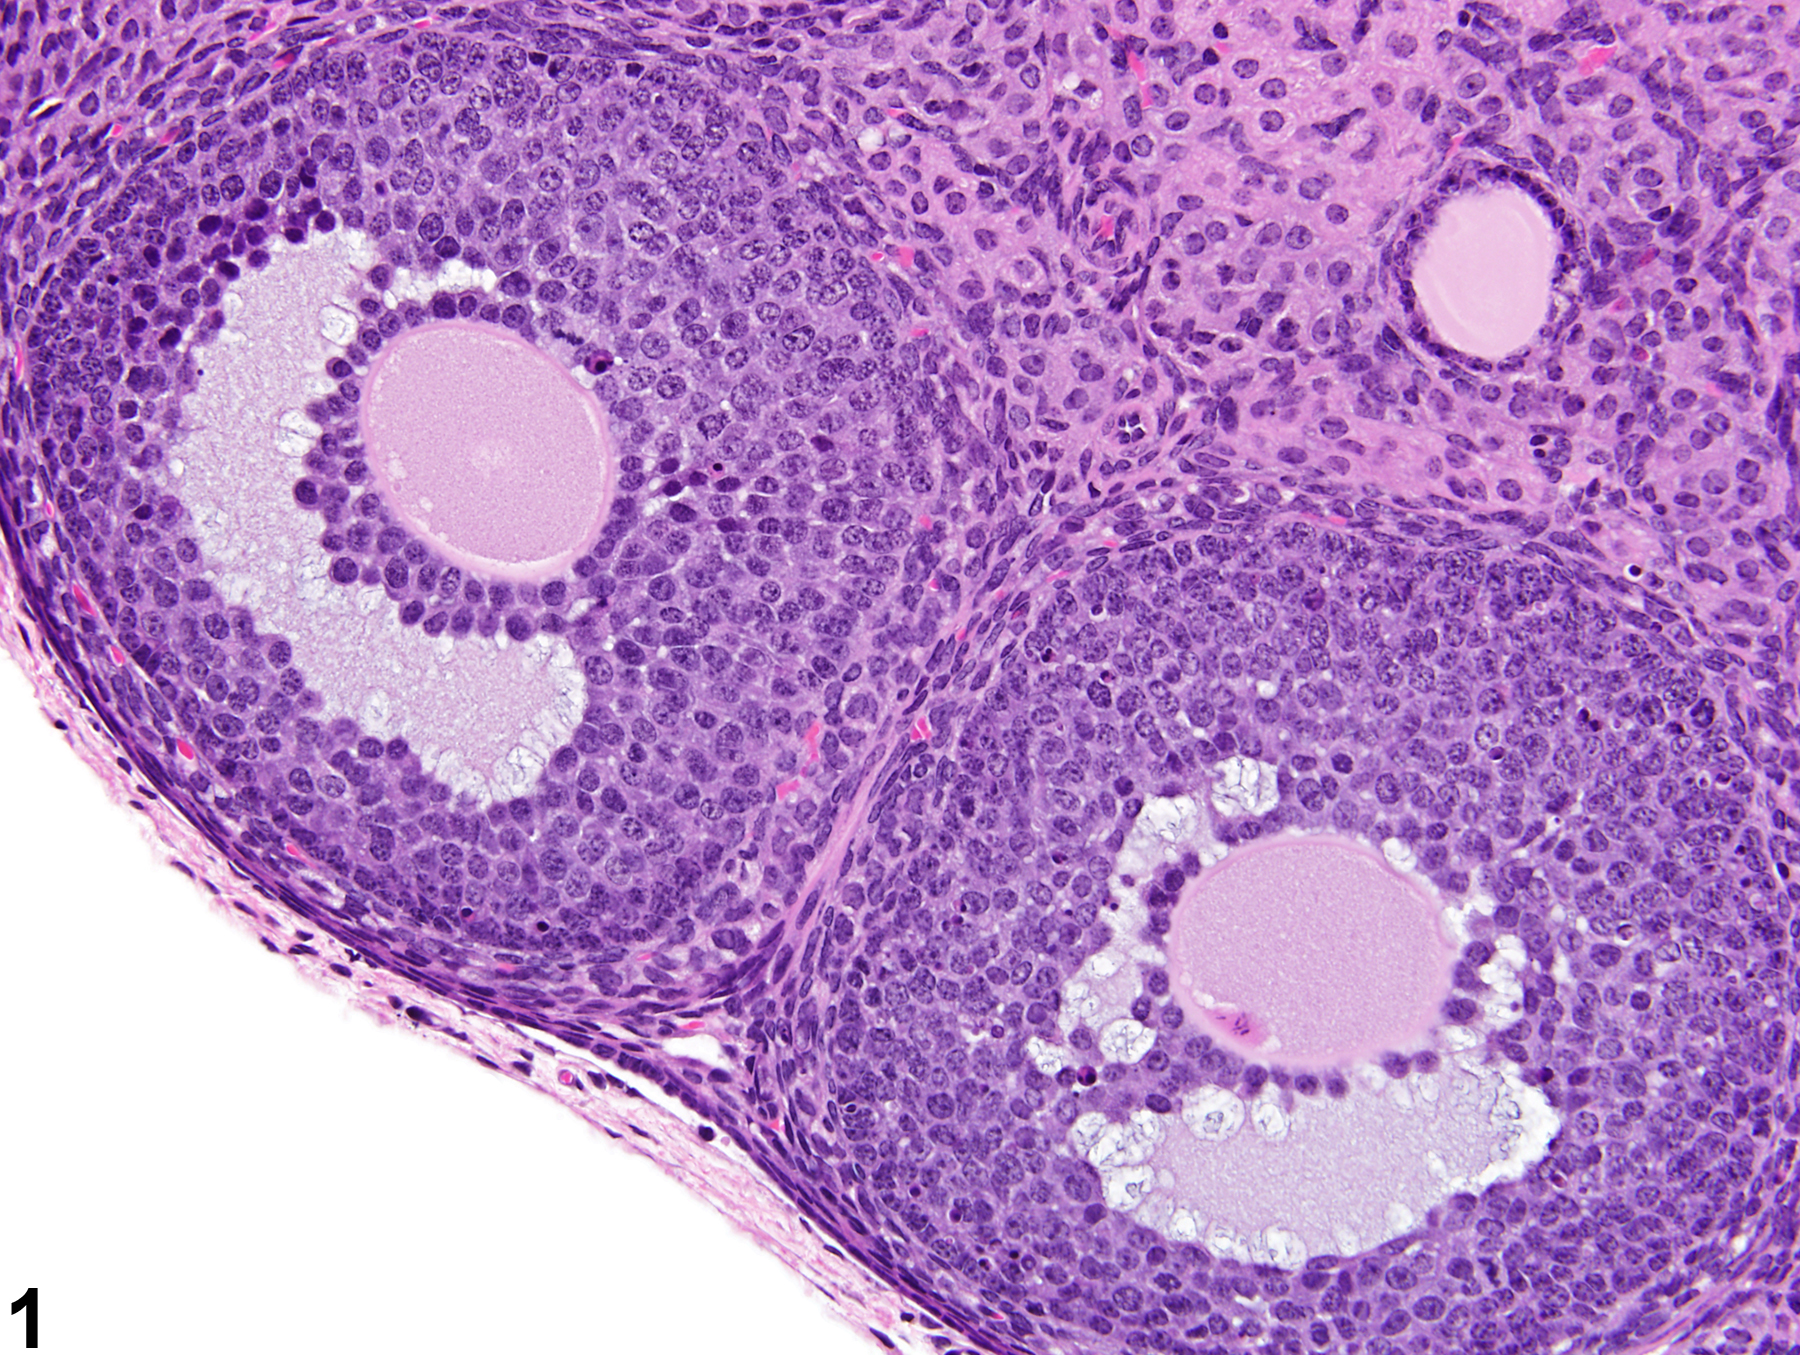 Image of normal follicles in the ovary from a female B6C3F1 mouse in a subchronic study